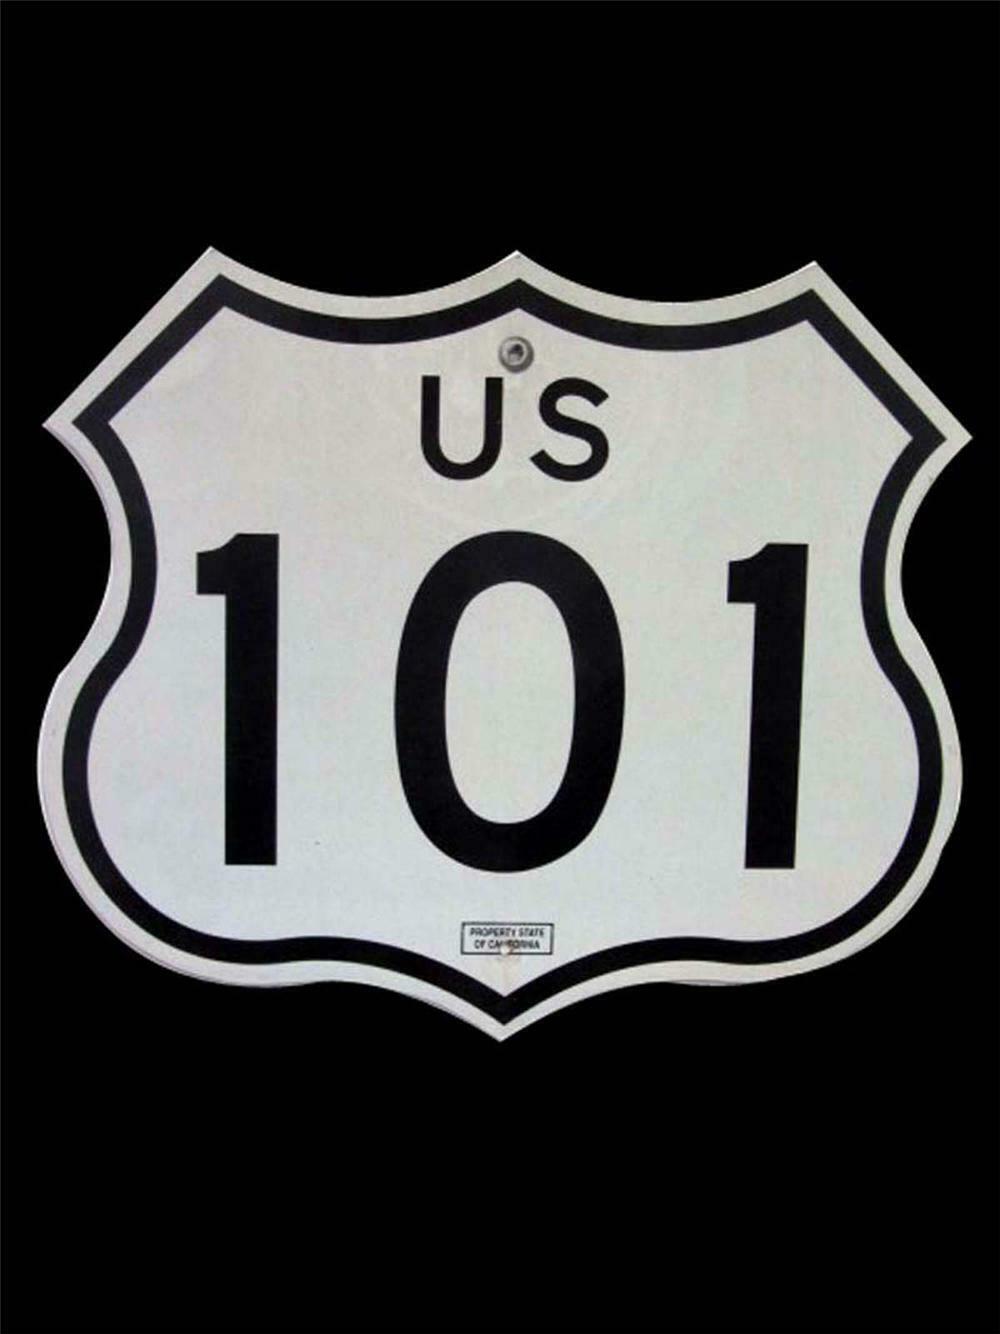 Pacific Coast Hwy 101 Metal Sign